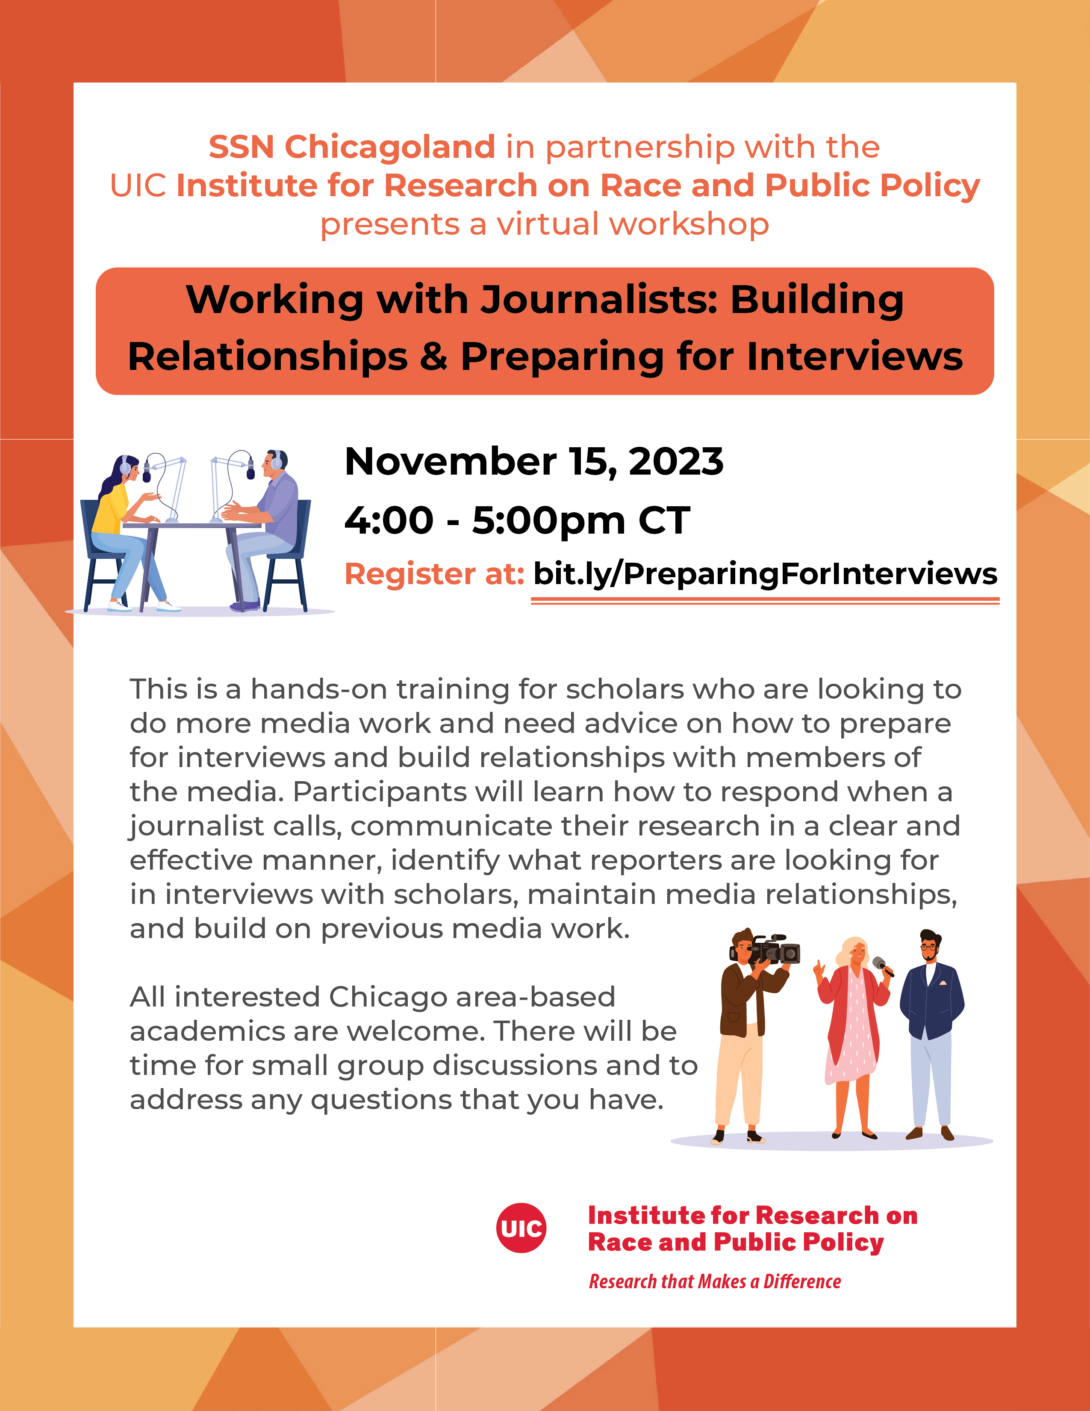 Working with Journalists: Building Relationships & Preparing for Interviews